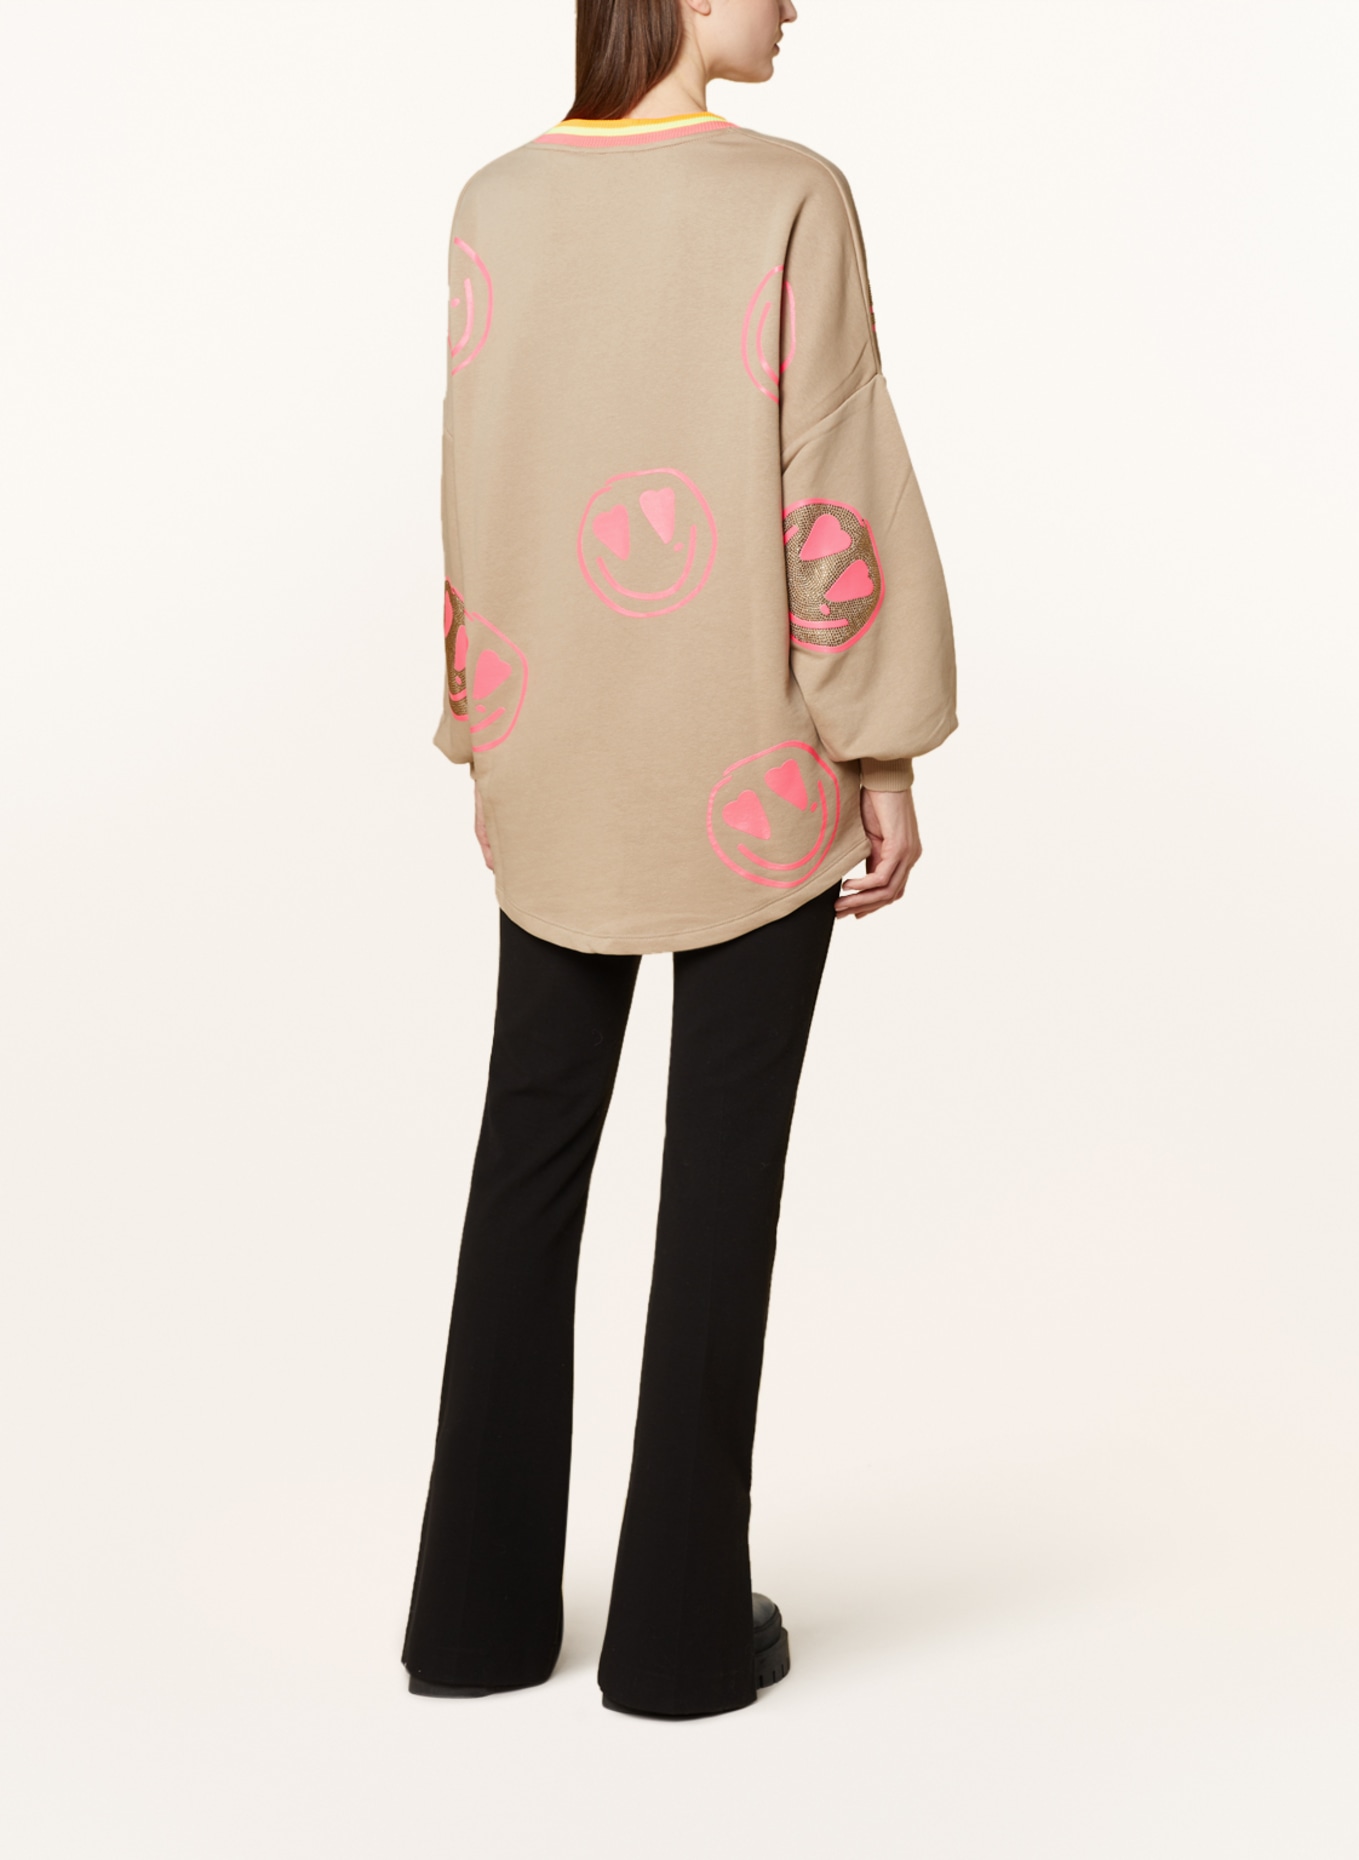 miss goodlife Oversized sweatshirt HAPPY FACE with decorative gems, Color: BEIGE/ NEON PINK/ GOLD (Image 3)